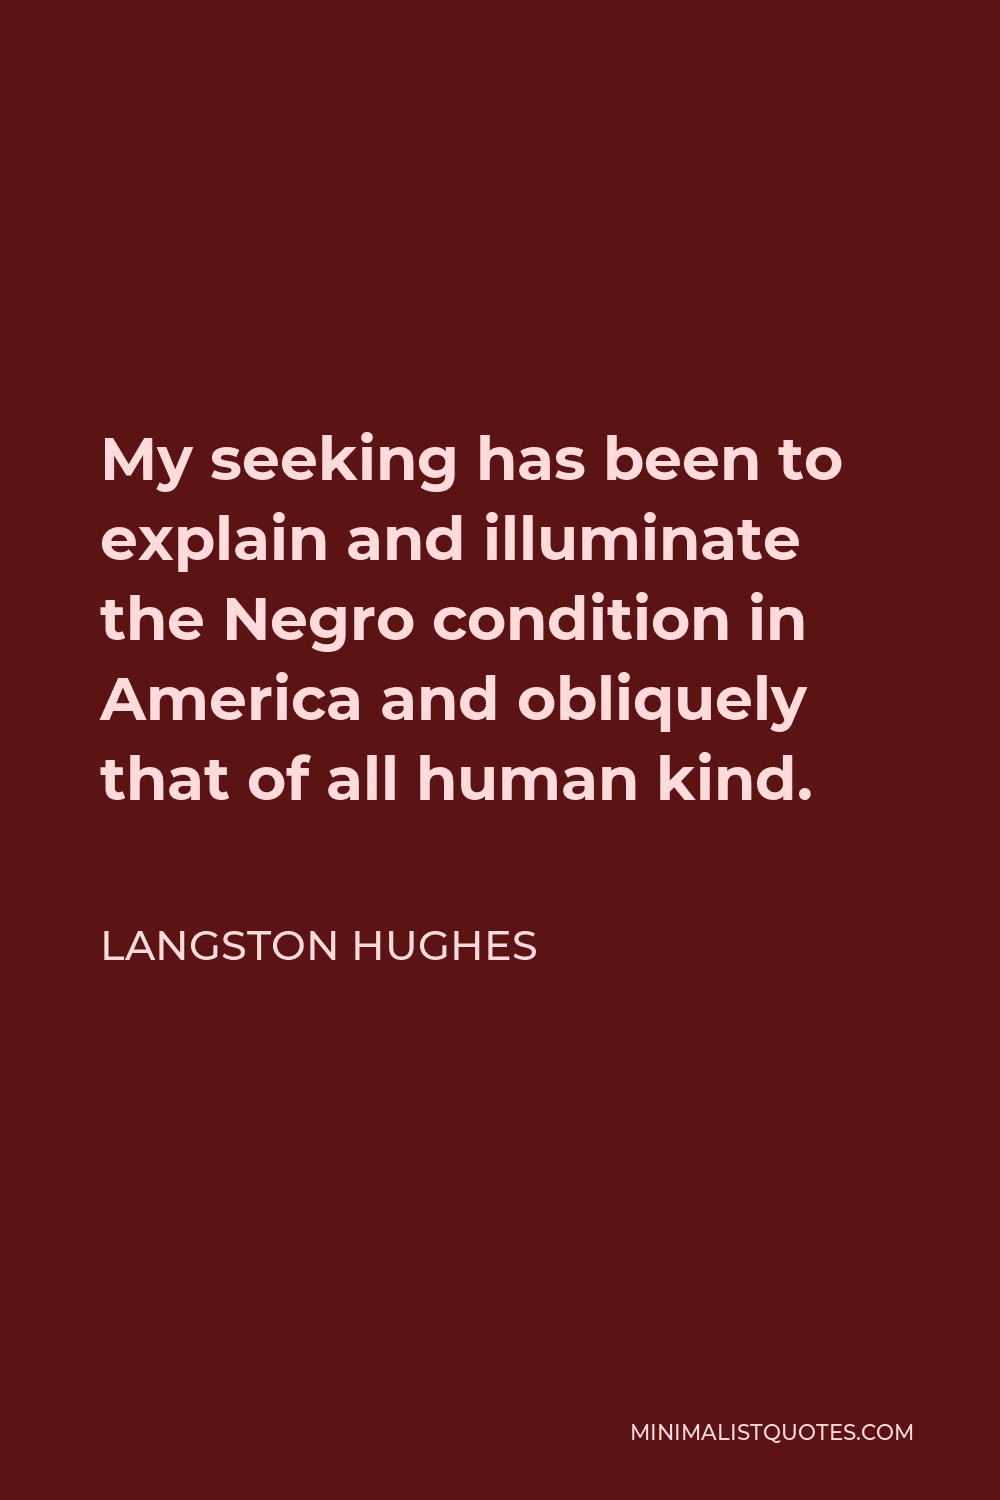 Langston Hughes Quote - My seeking has been to explain and illuminate the Negro condition in America and obliquely that of all human kind.